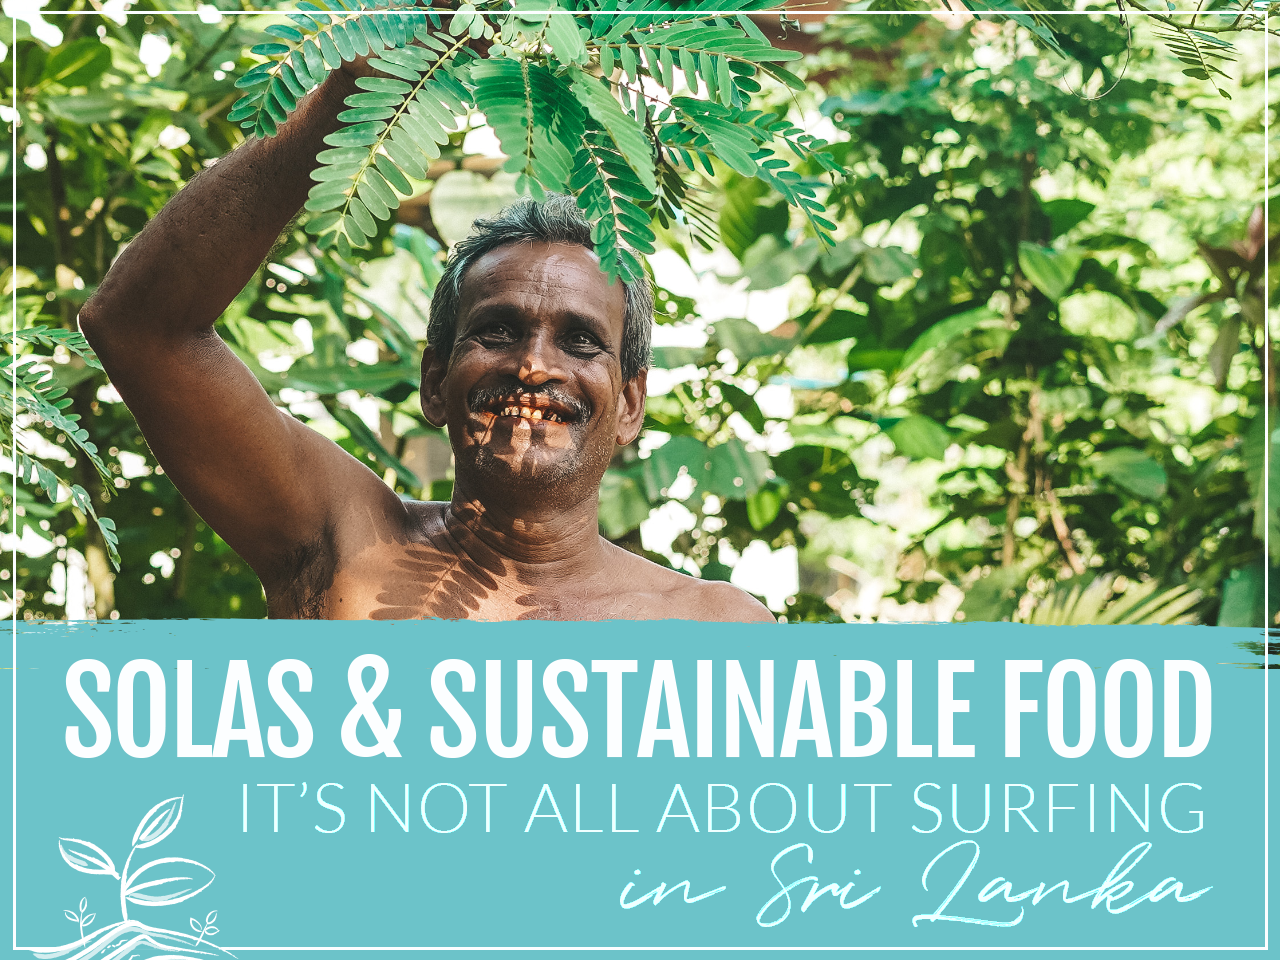 Solas and Sustainable Food - It's not all about surfing in Sri Lanka